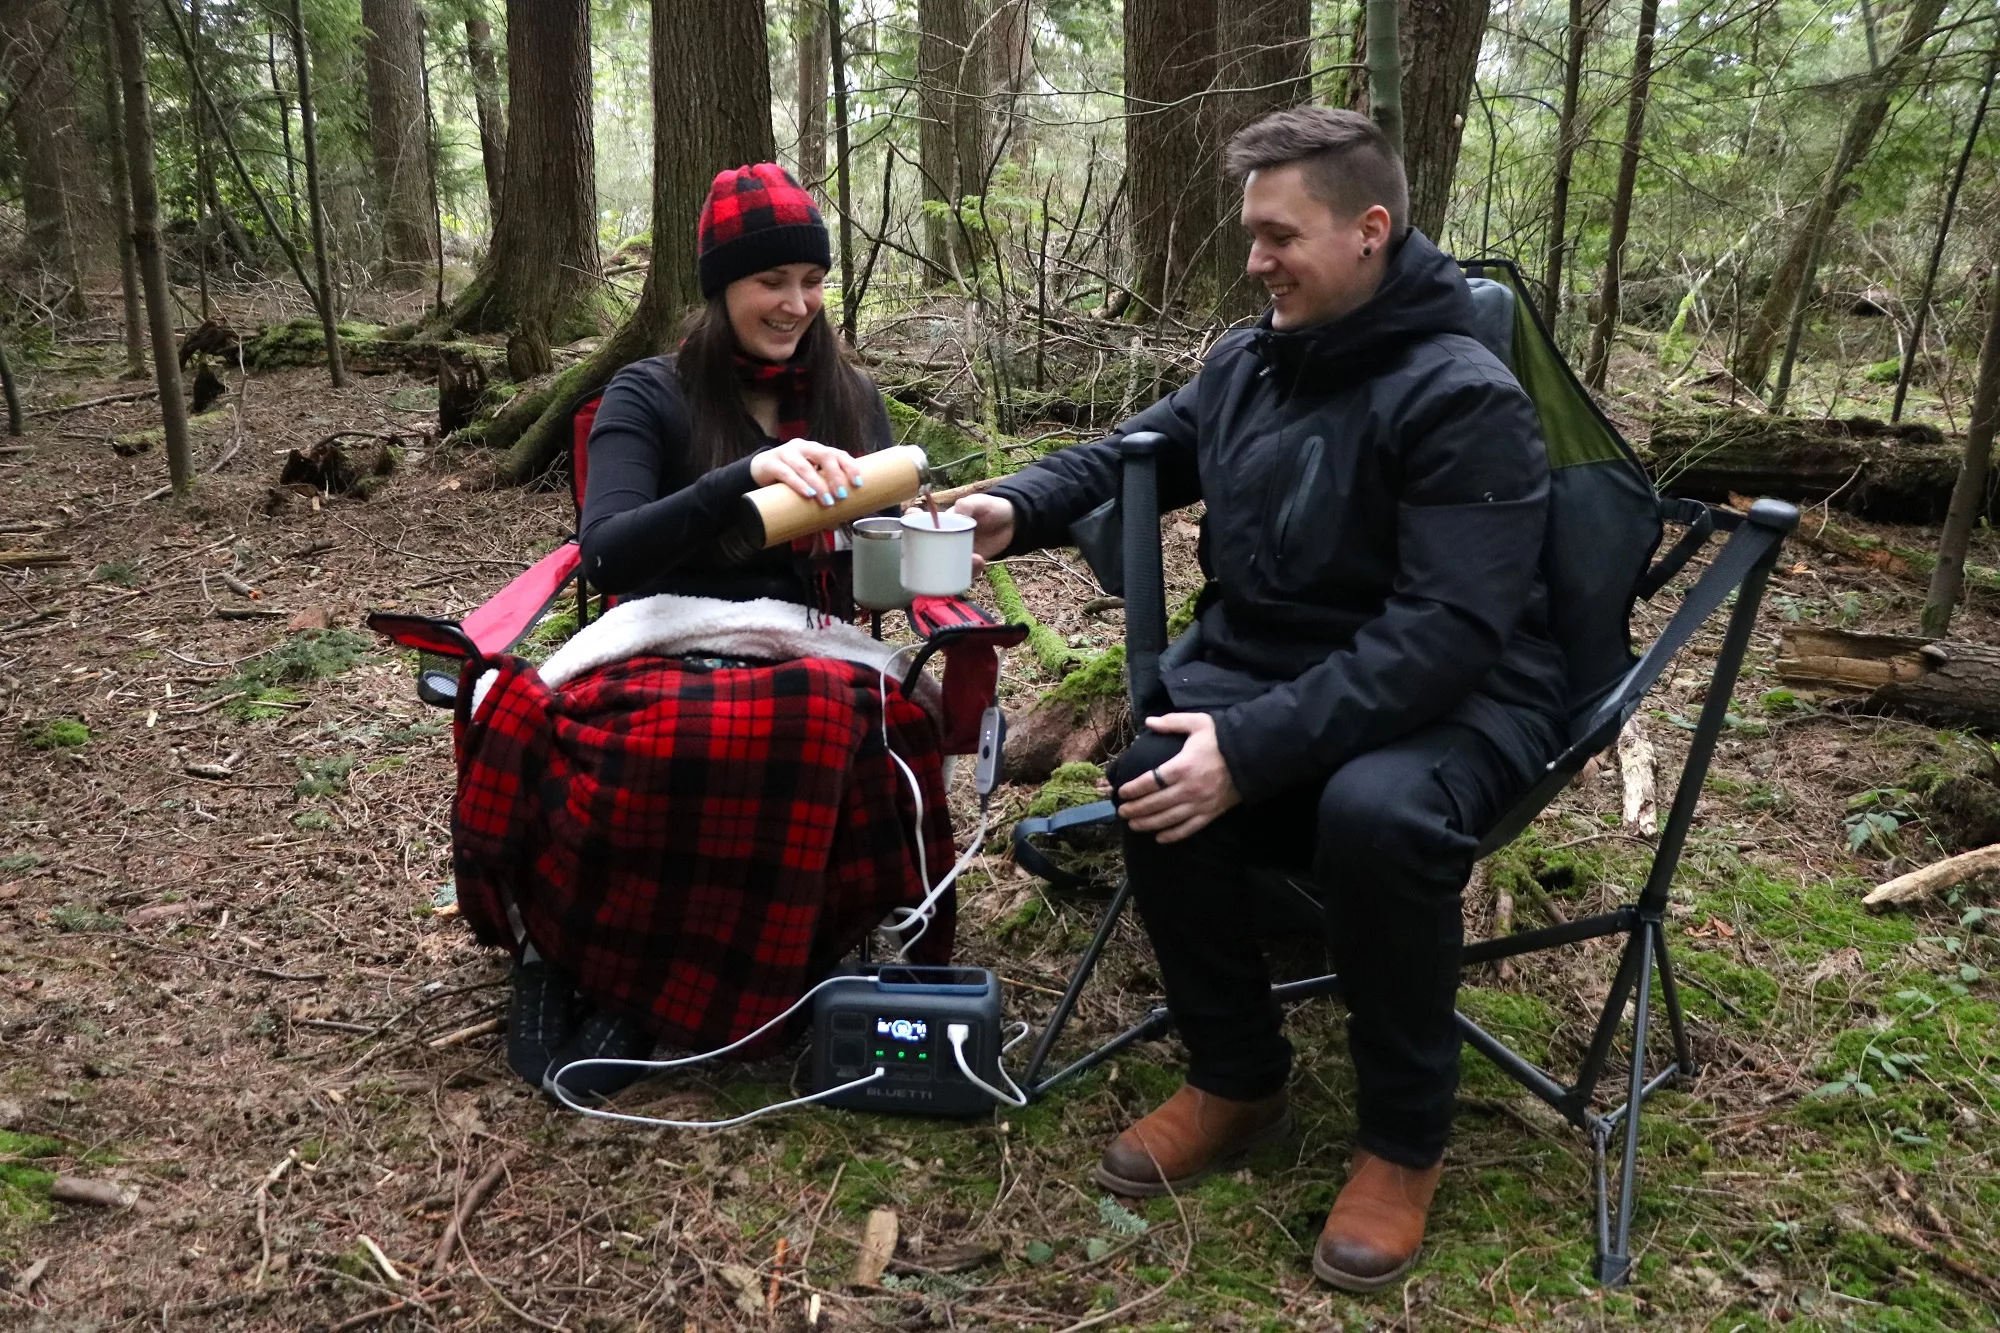 Two people outdoors enjoying the forest while staying warm with a heated blanket and hot chocolate. Yum!